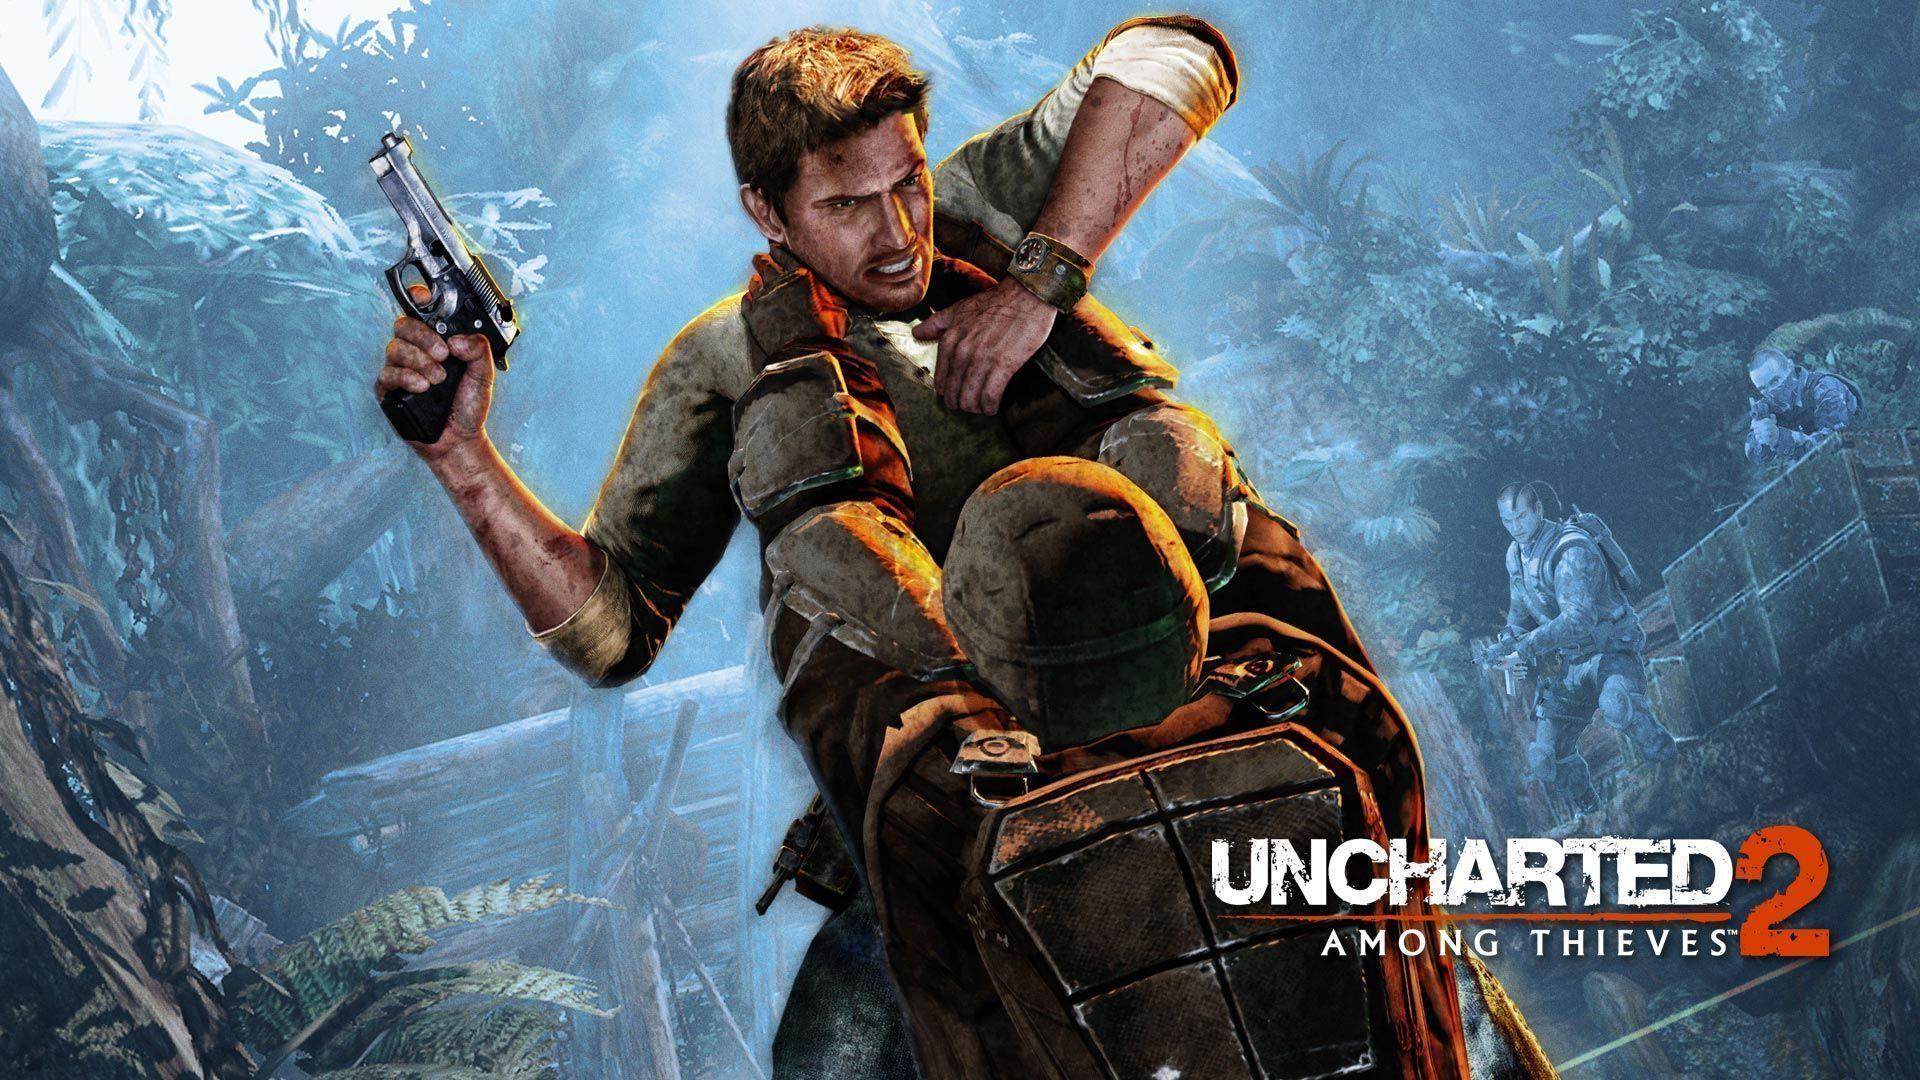 Uncharted 2 Among Thieves Wallpaper 4k